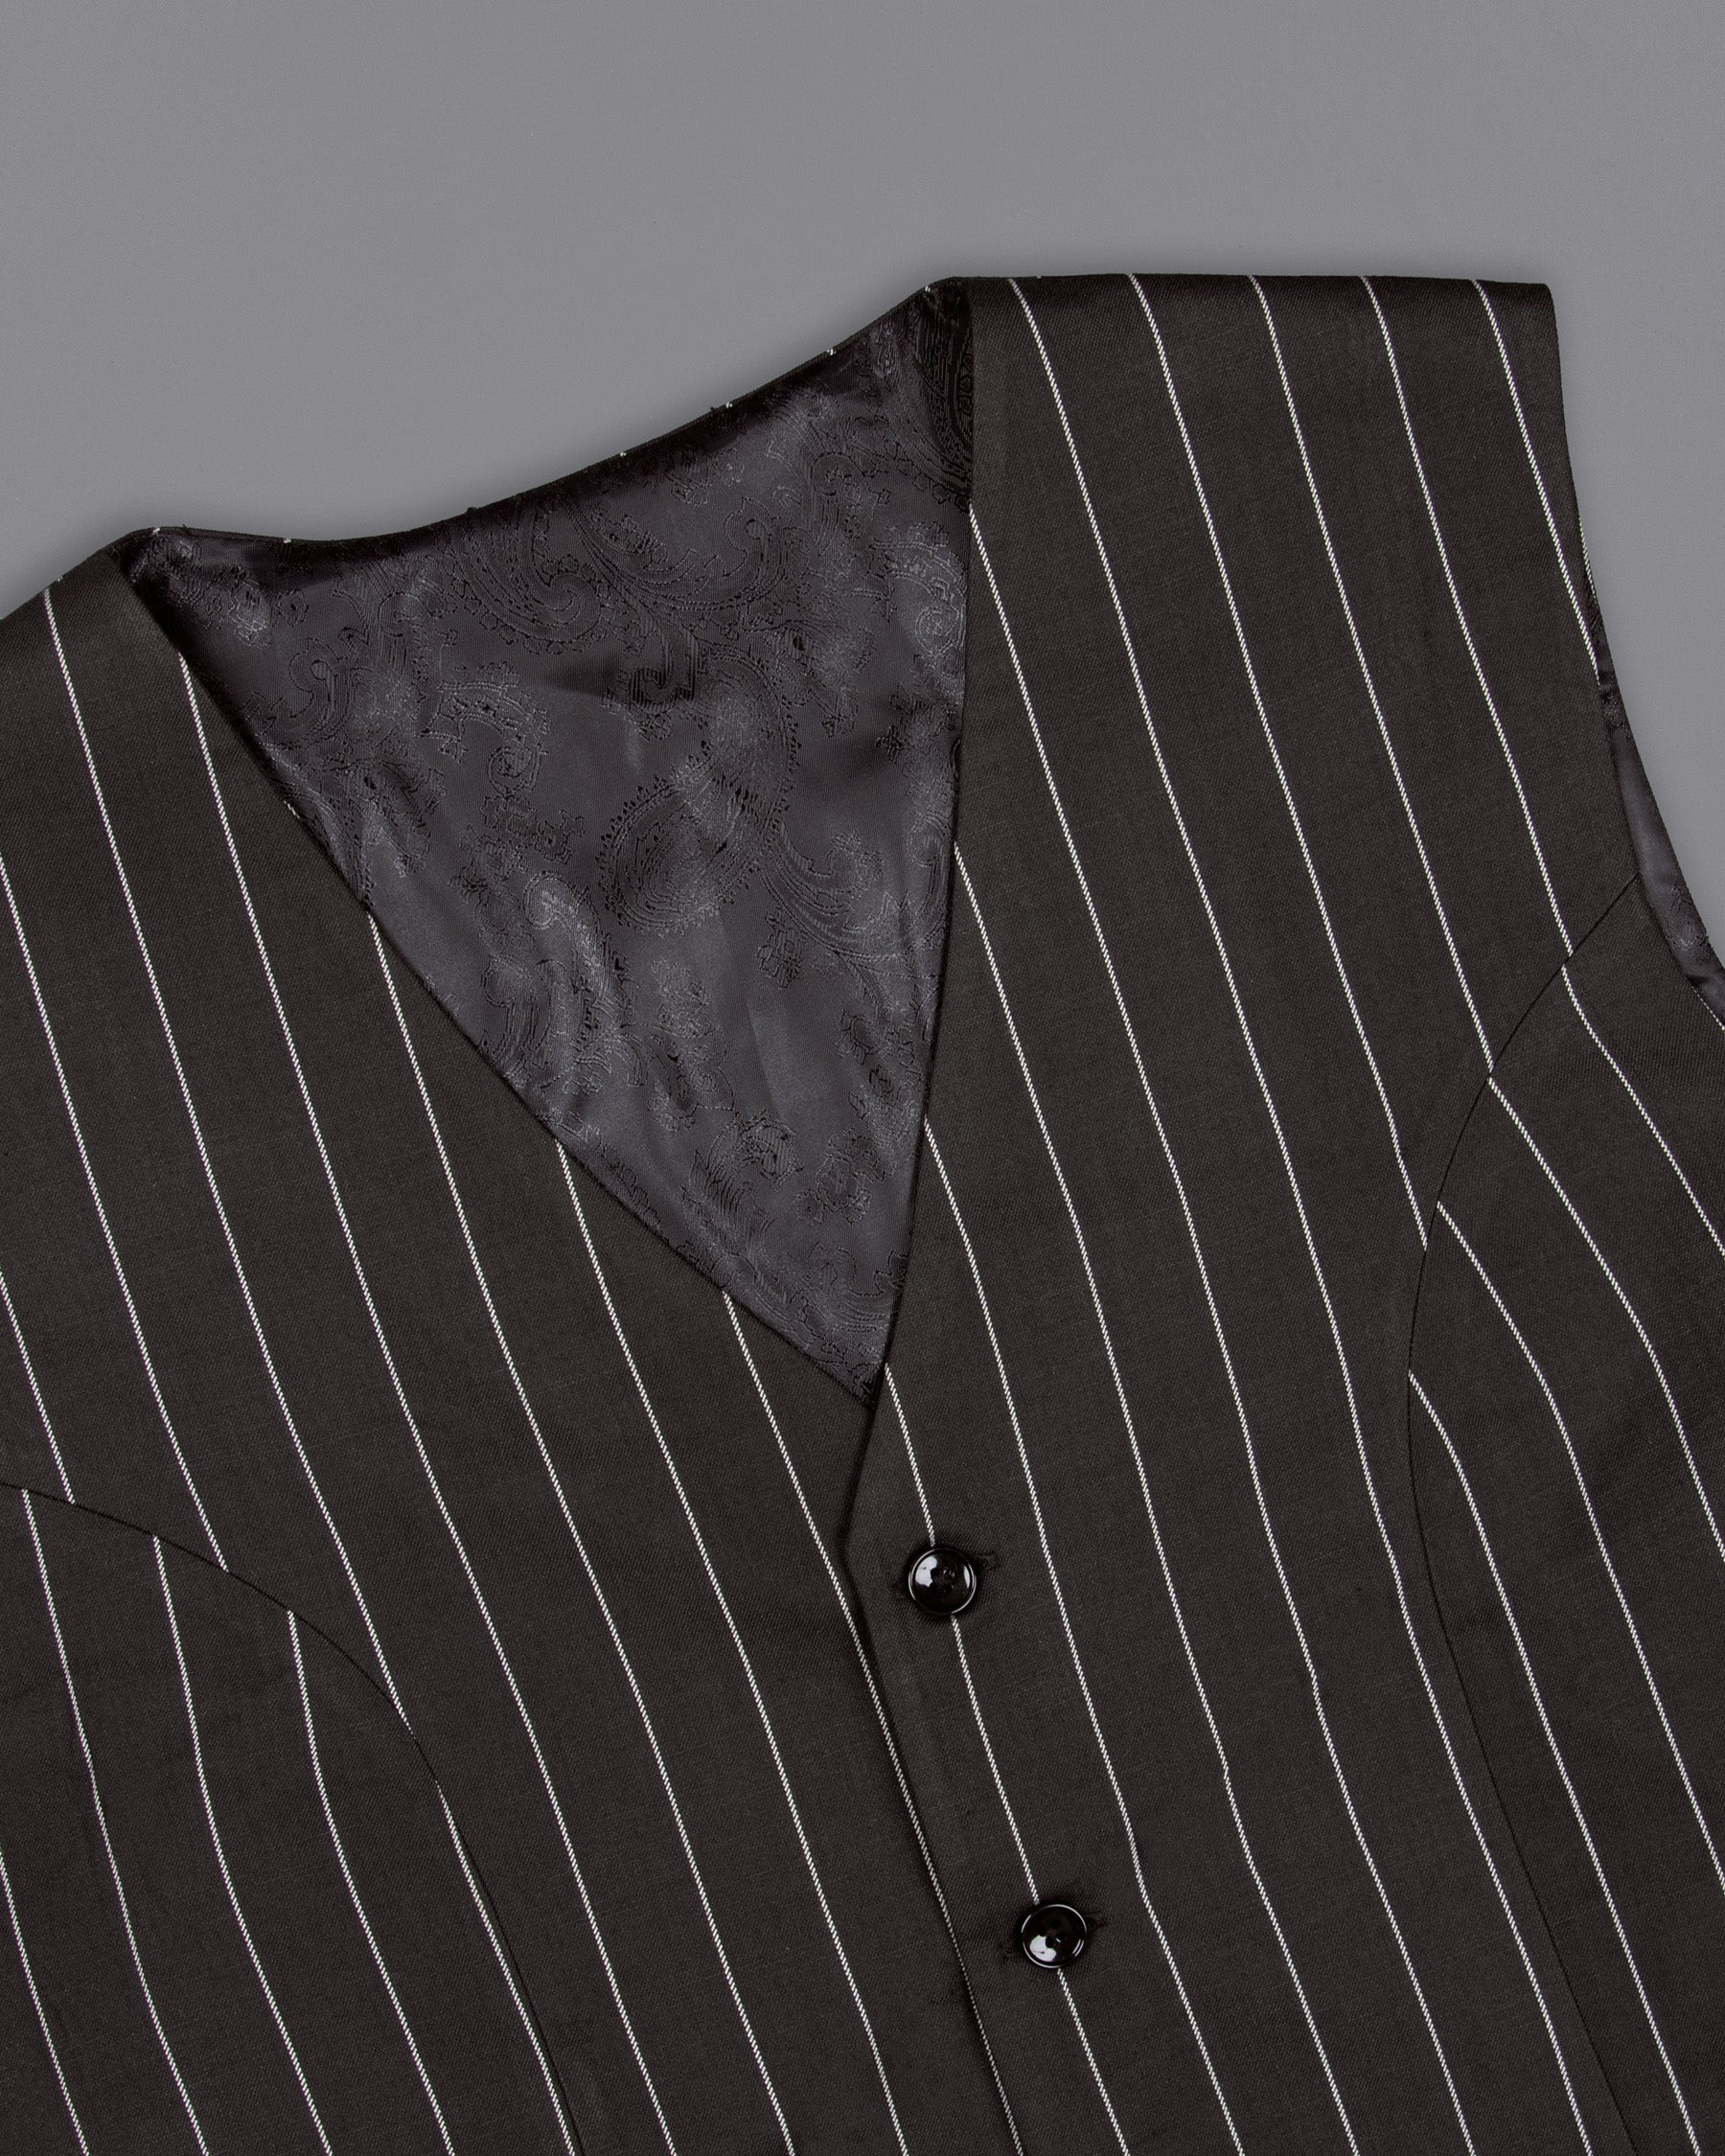 Charcoal Gray with white Striped Woolrich Suit